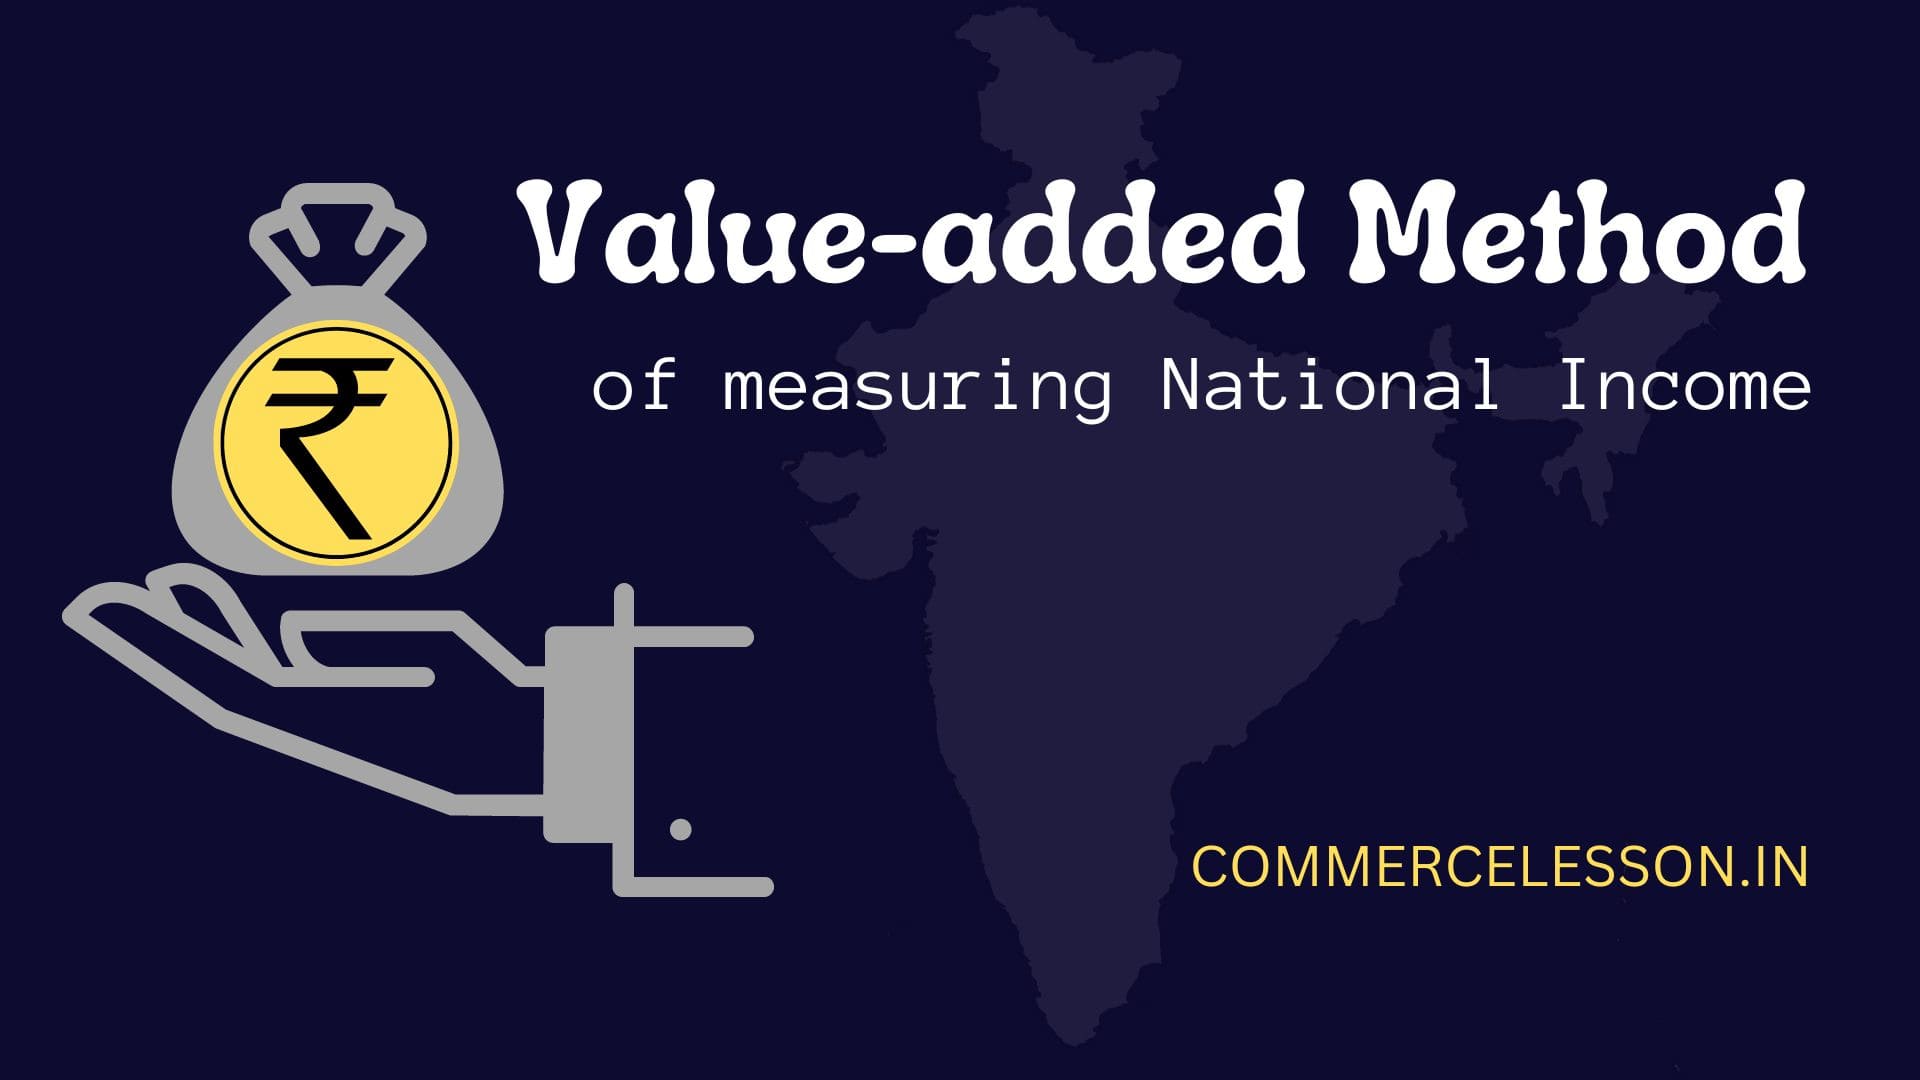 Value-added Method of measuring National Income